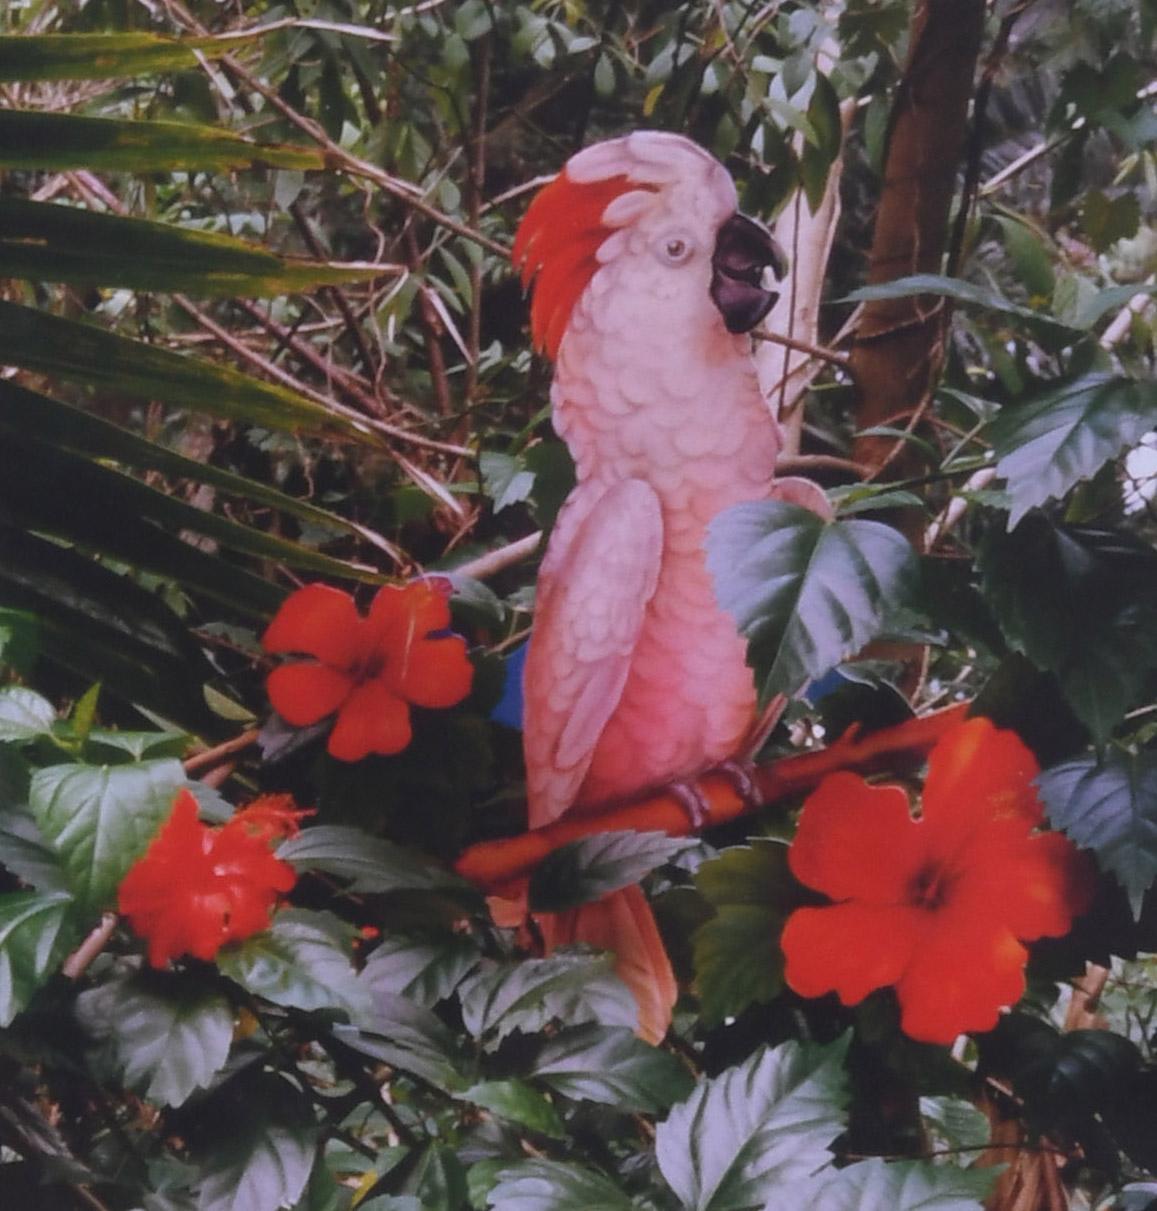 Bird and Hibiscus - Photograph by Suzanne Camp Crosby